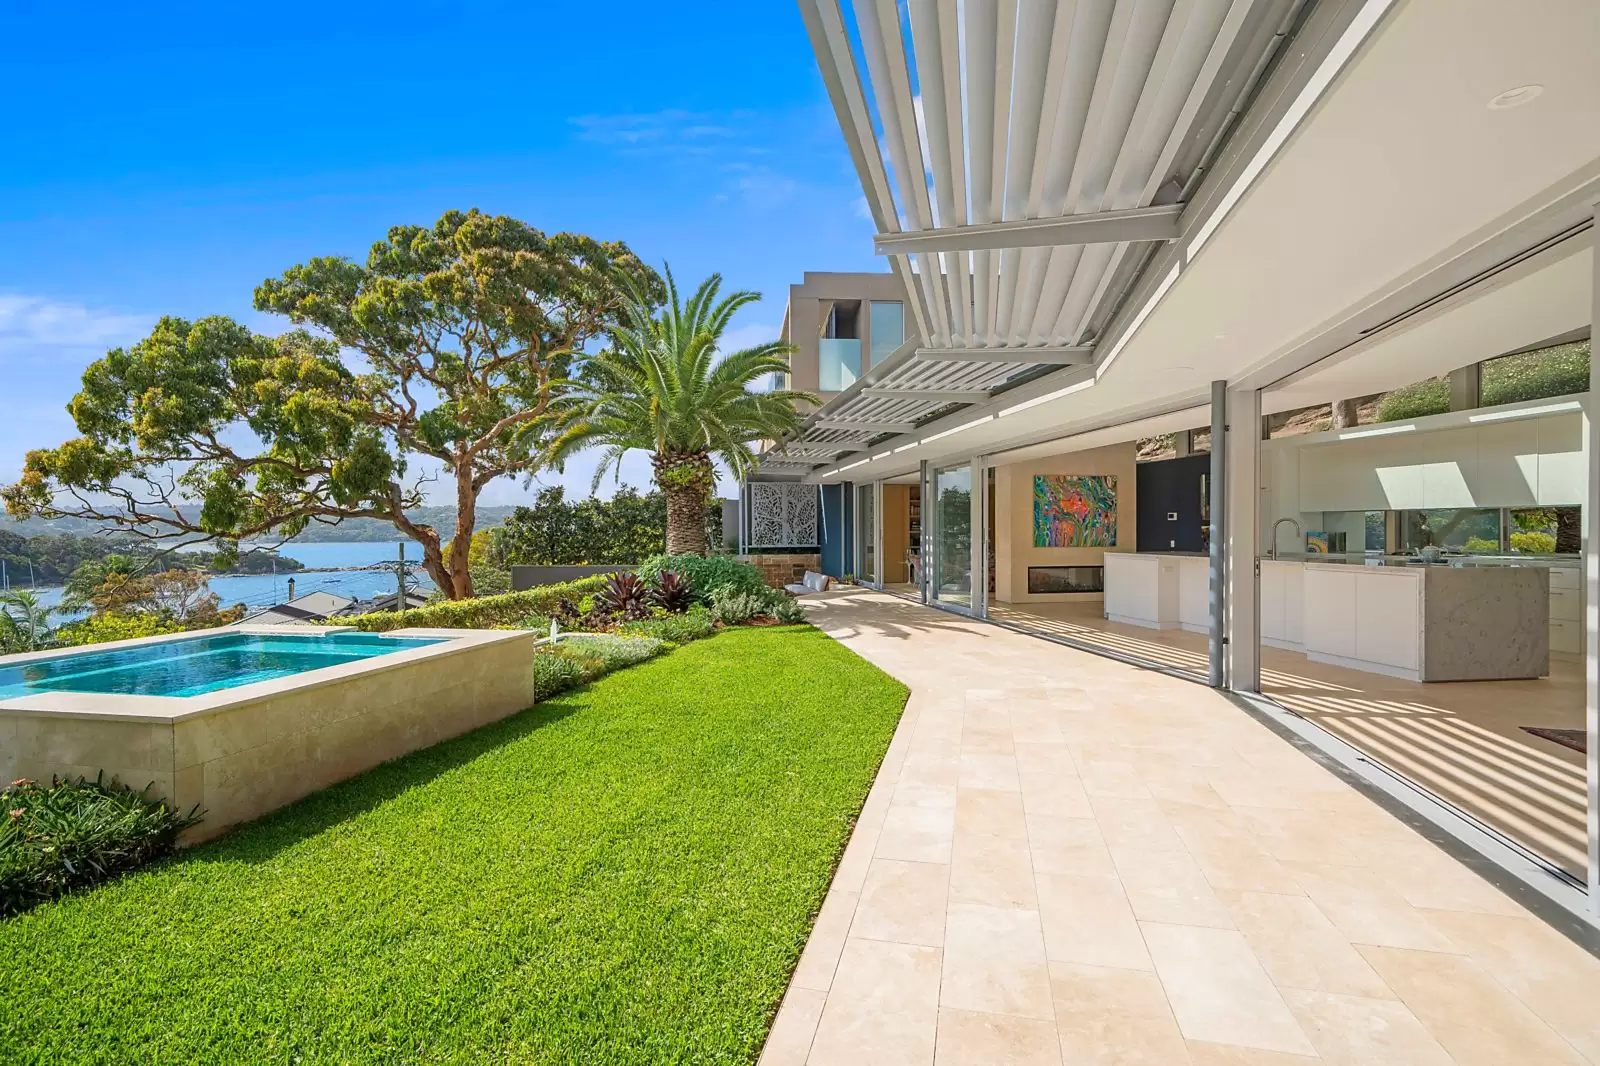 Photo #20: 97 Wentworth Road, Vaucluse - For Sale by Sydney Sotheby's International Realty